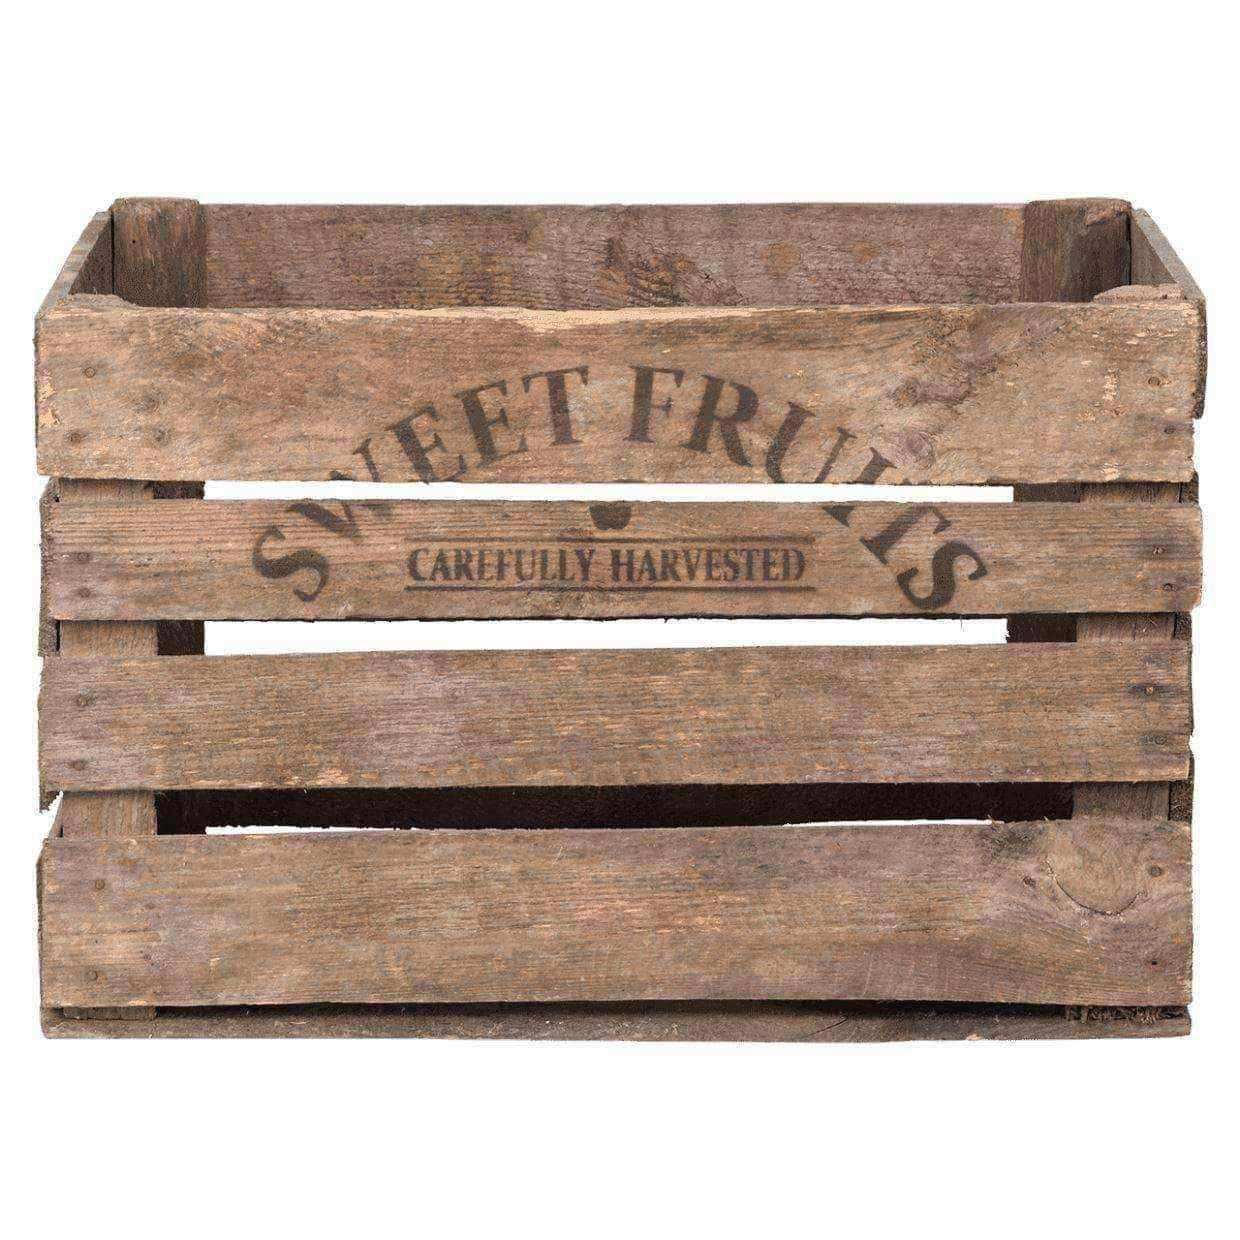 Rustic Wooden Storage Crate - The Farthing